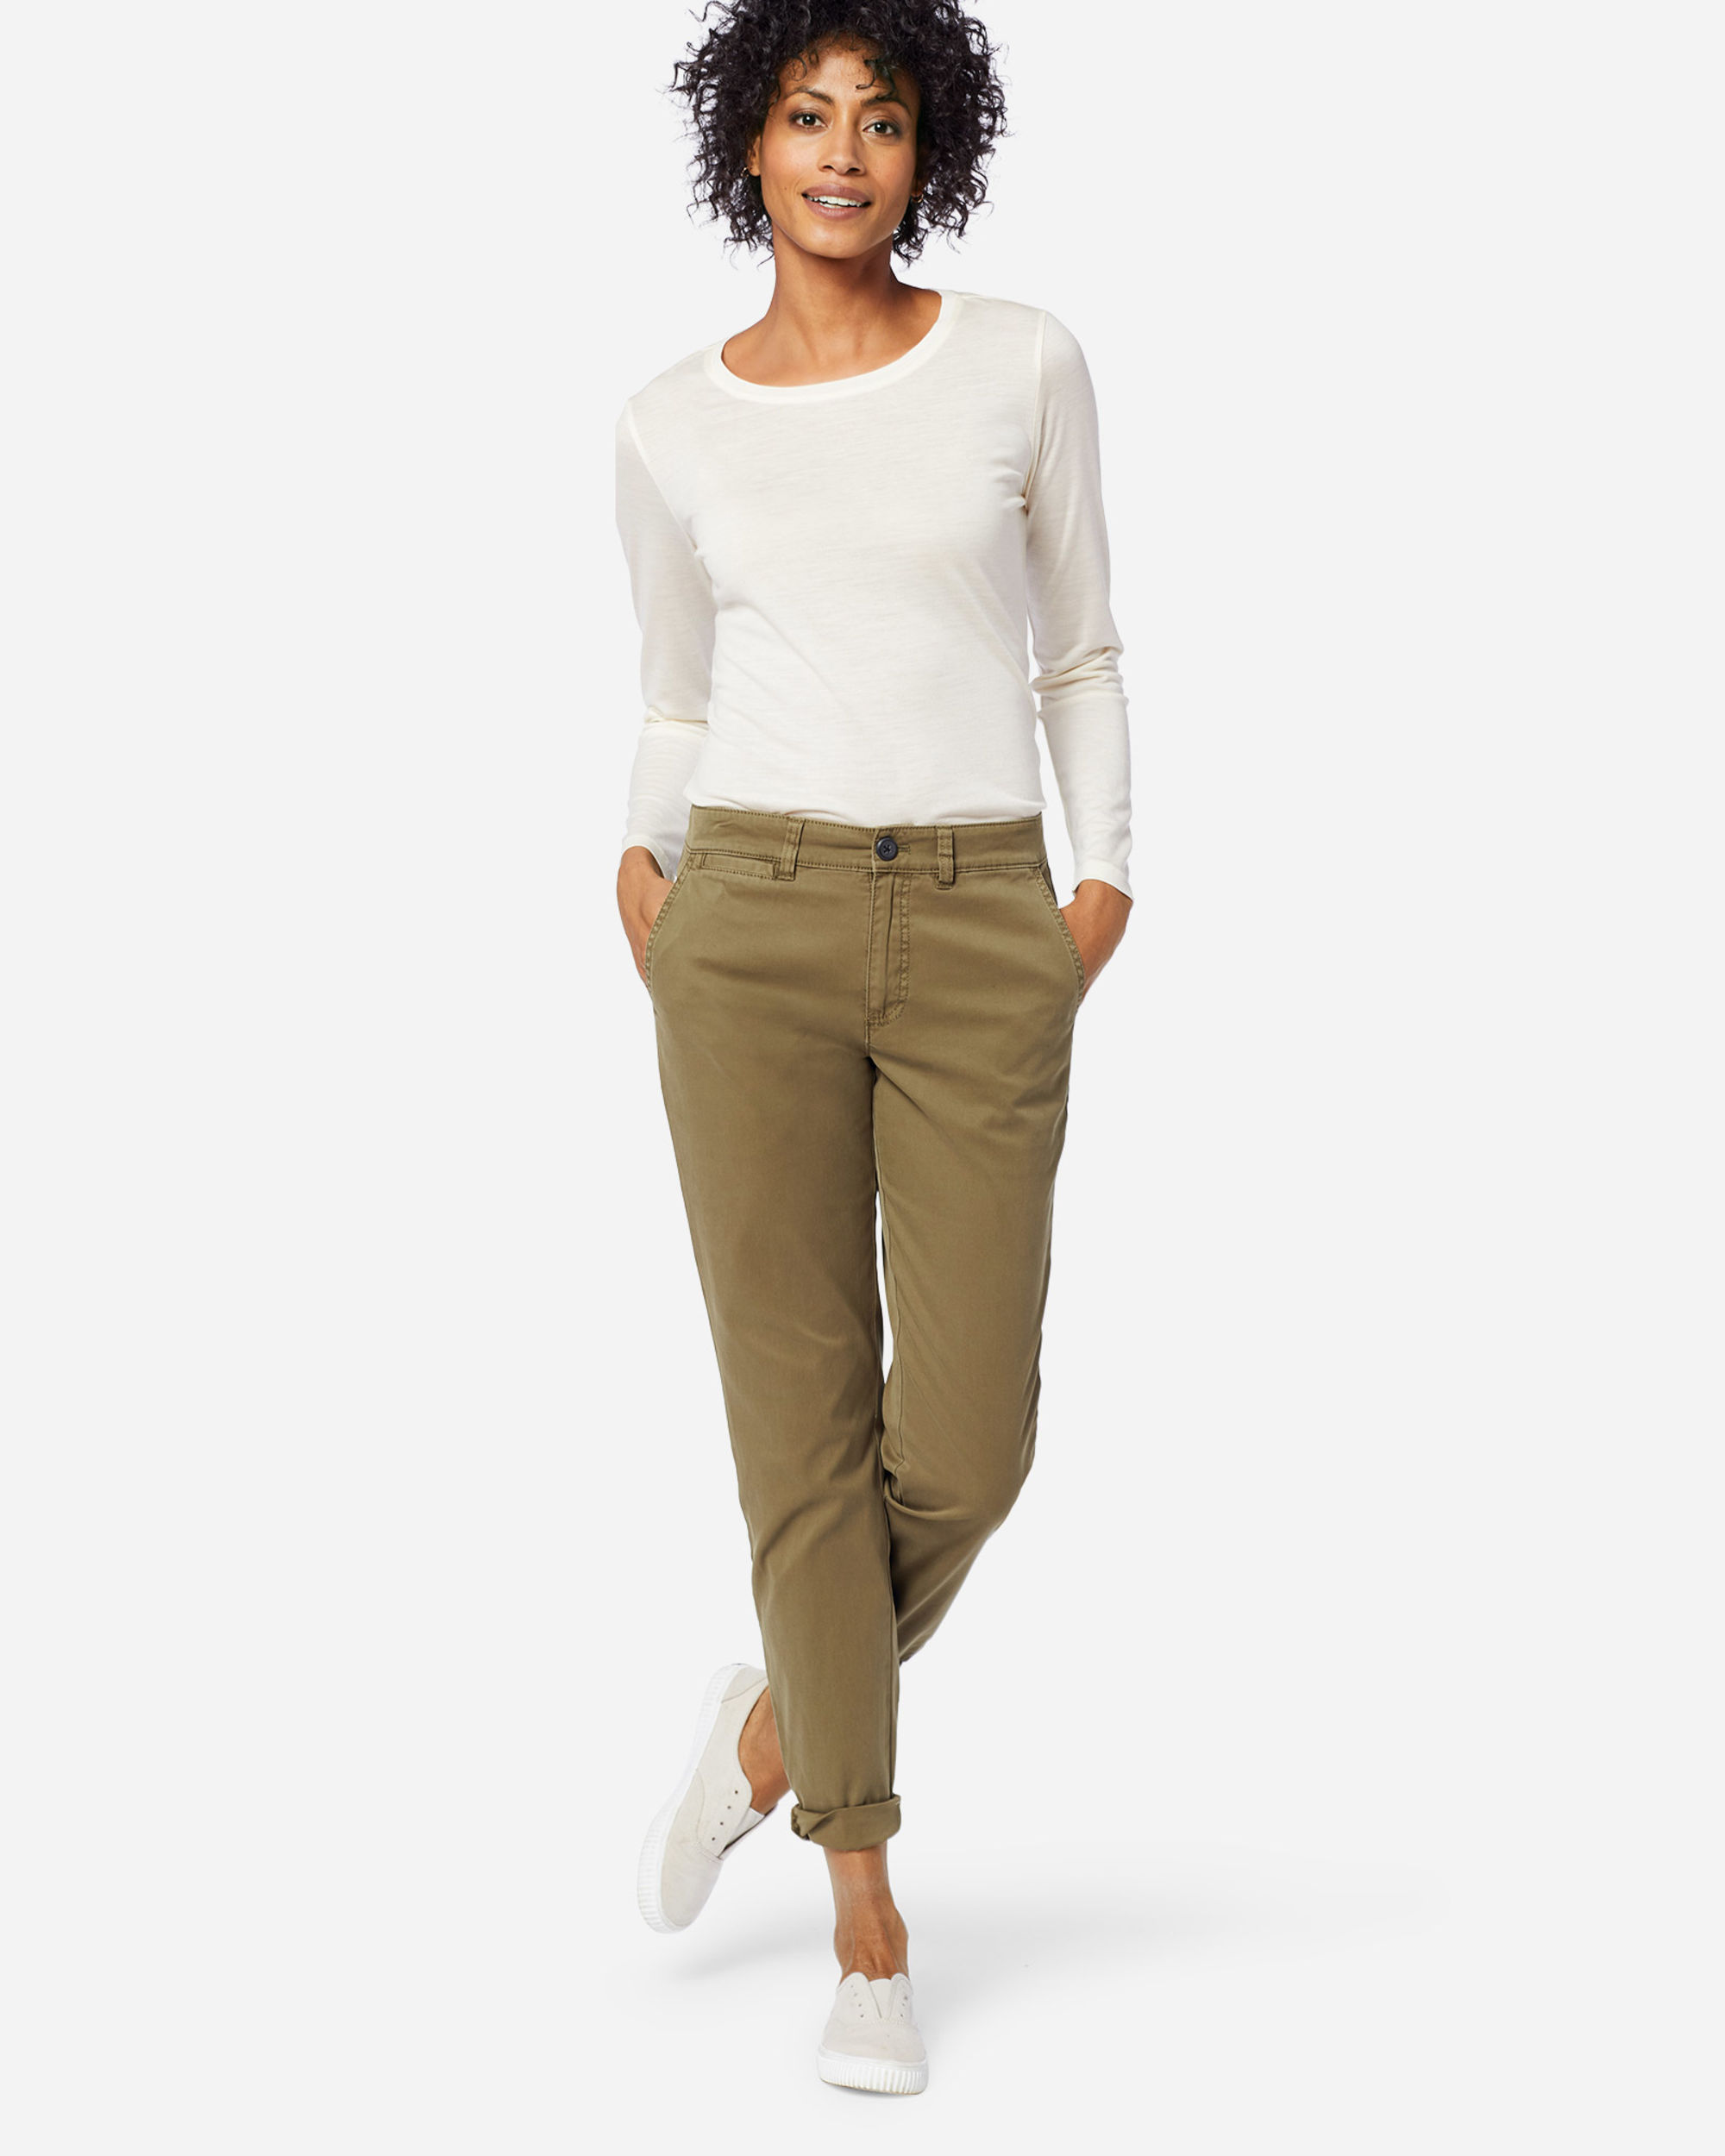 Old Navy High-Waisted OGC Chino Pants for Women beige - 792006152